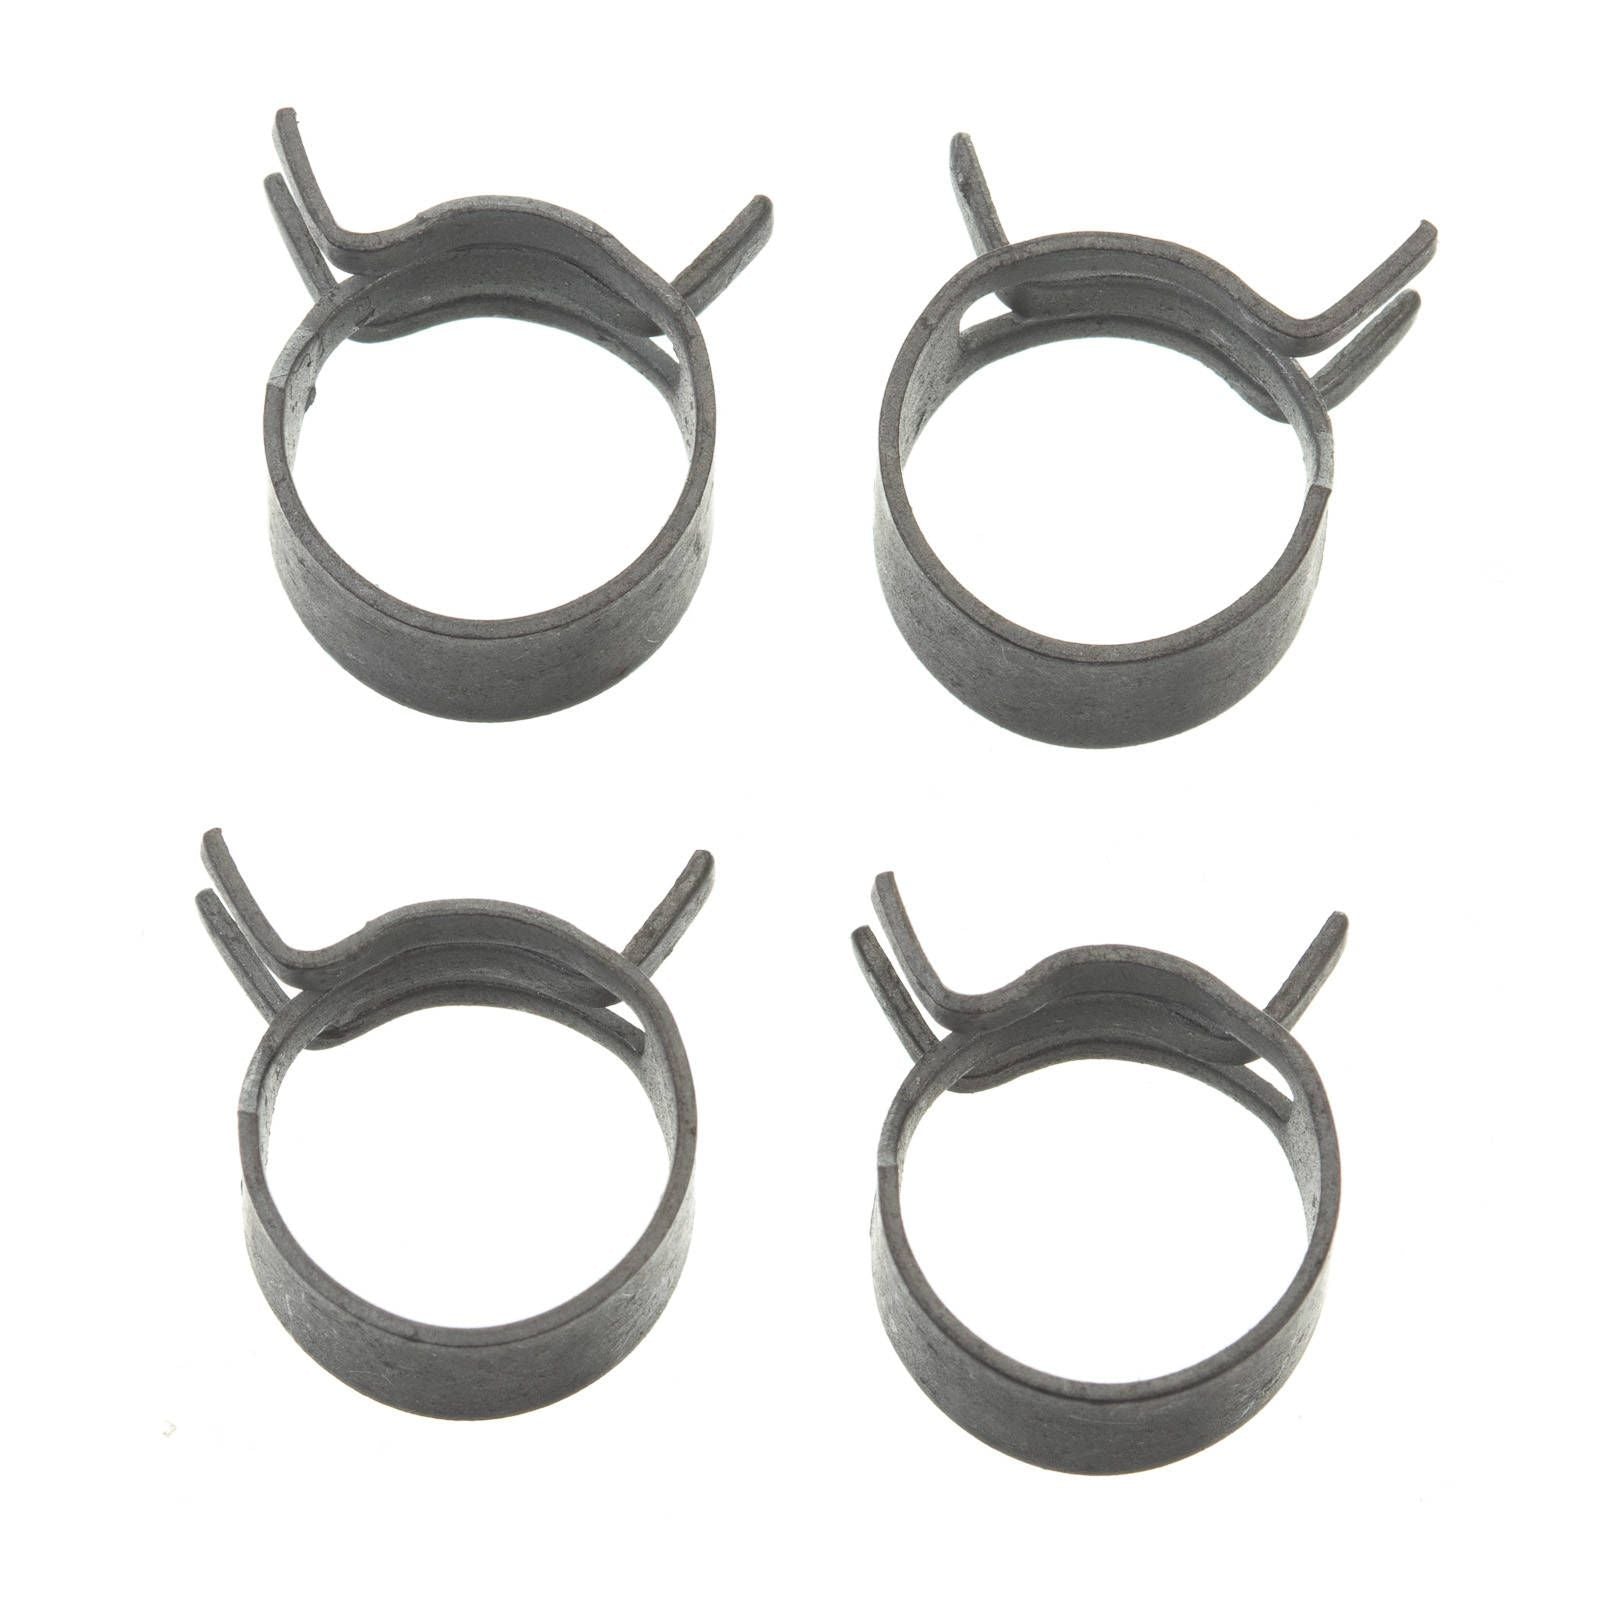 New ALL BALLS Racing Fuel Hose Clamp Kit - 11.7mm Band (4 Pack) #ABFS00052